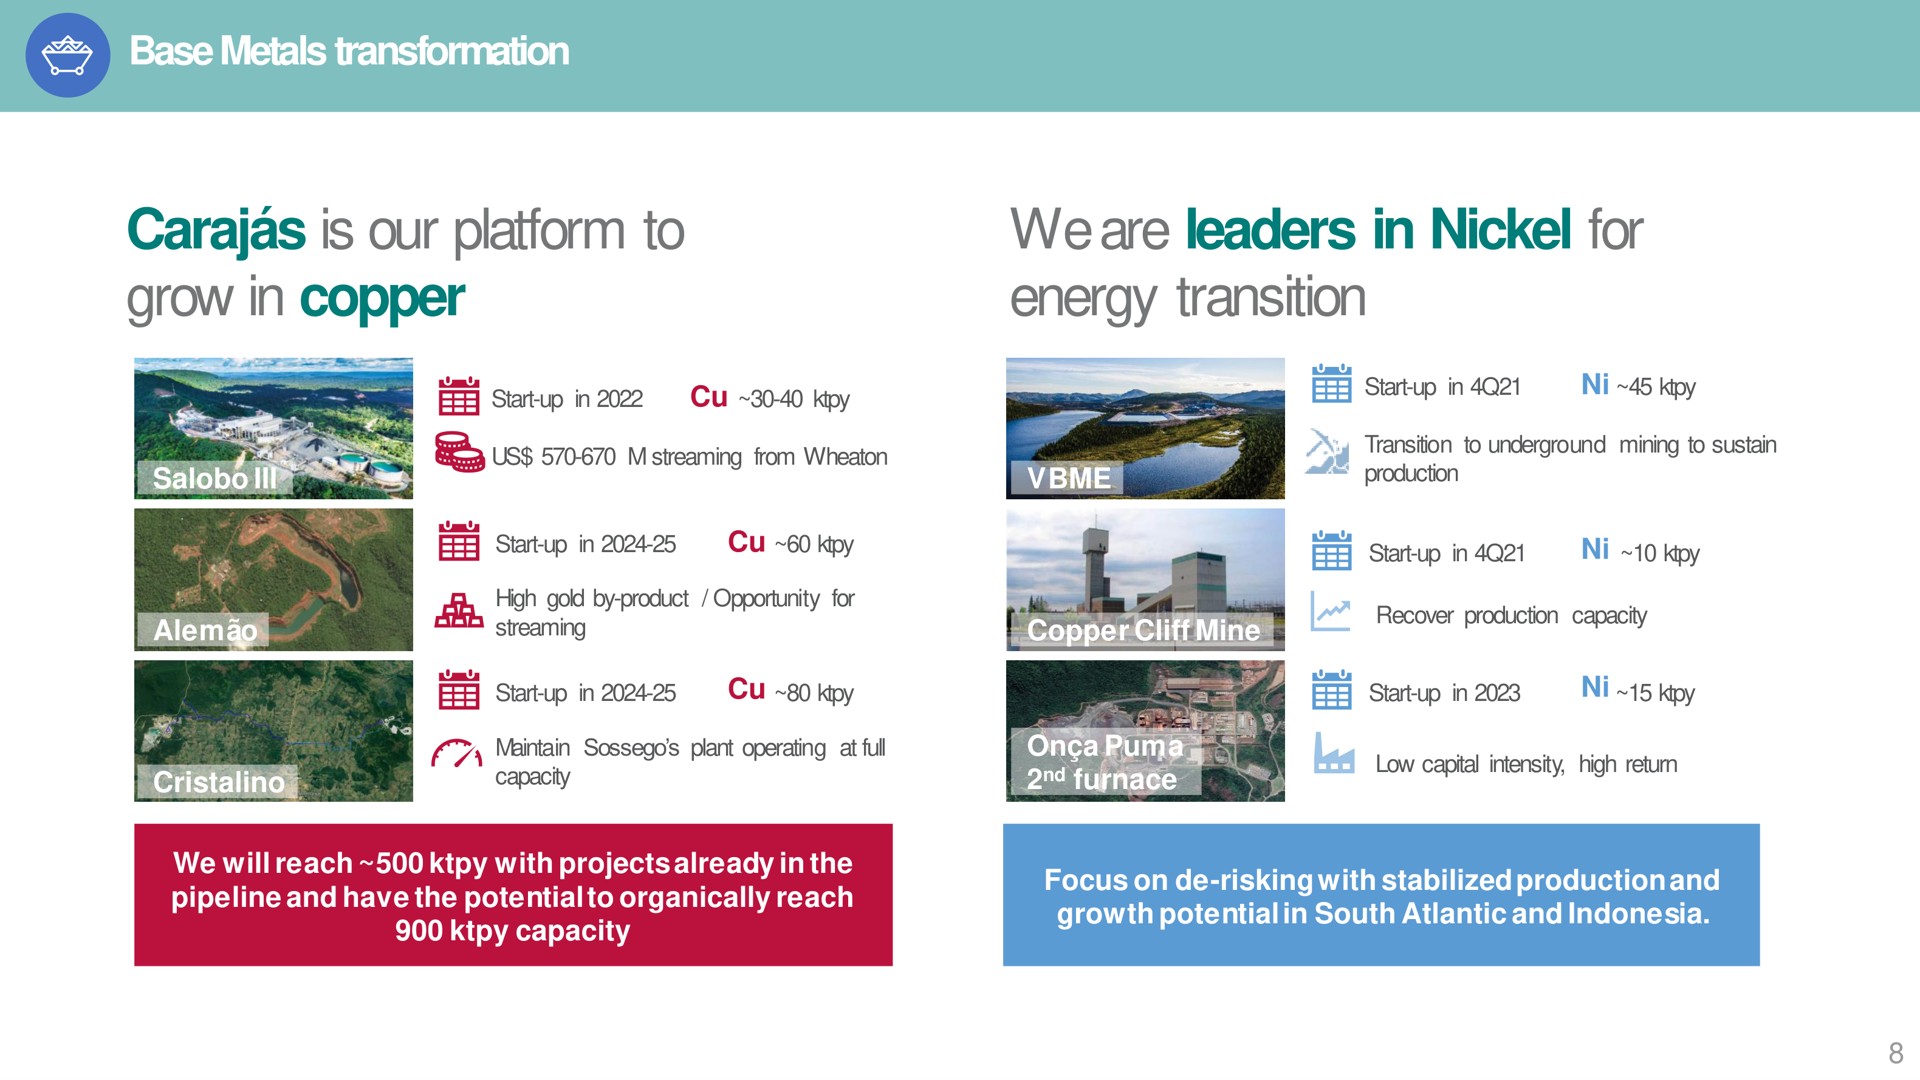 base metals transformation is our platform to grow in copper we are leaders in nickel for energy transition | Vale